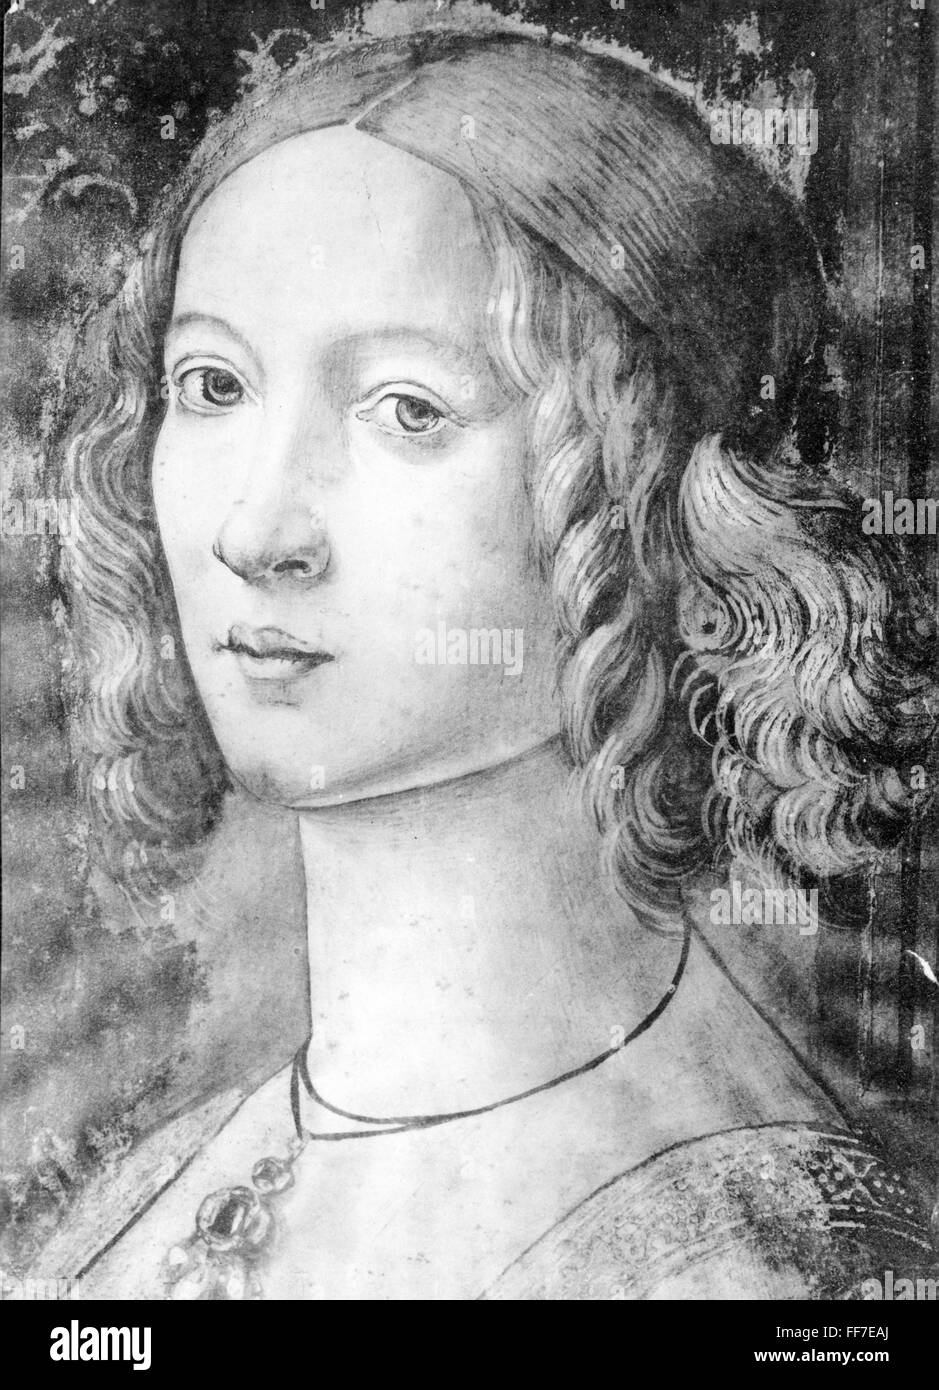 Middle Ages, people, hair style of a young woman, painting by Domenico  Ghirlandaio (1449 - 1494), detail, 15th century, 15th century, Middle Ages,  medieval, mediaeval, Renaissance, Italy, fine arts, art, art of